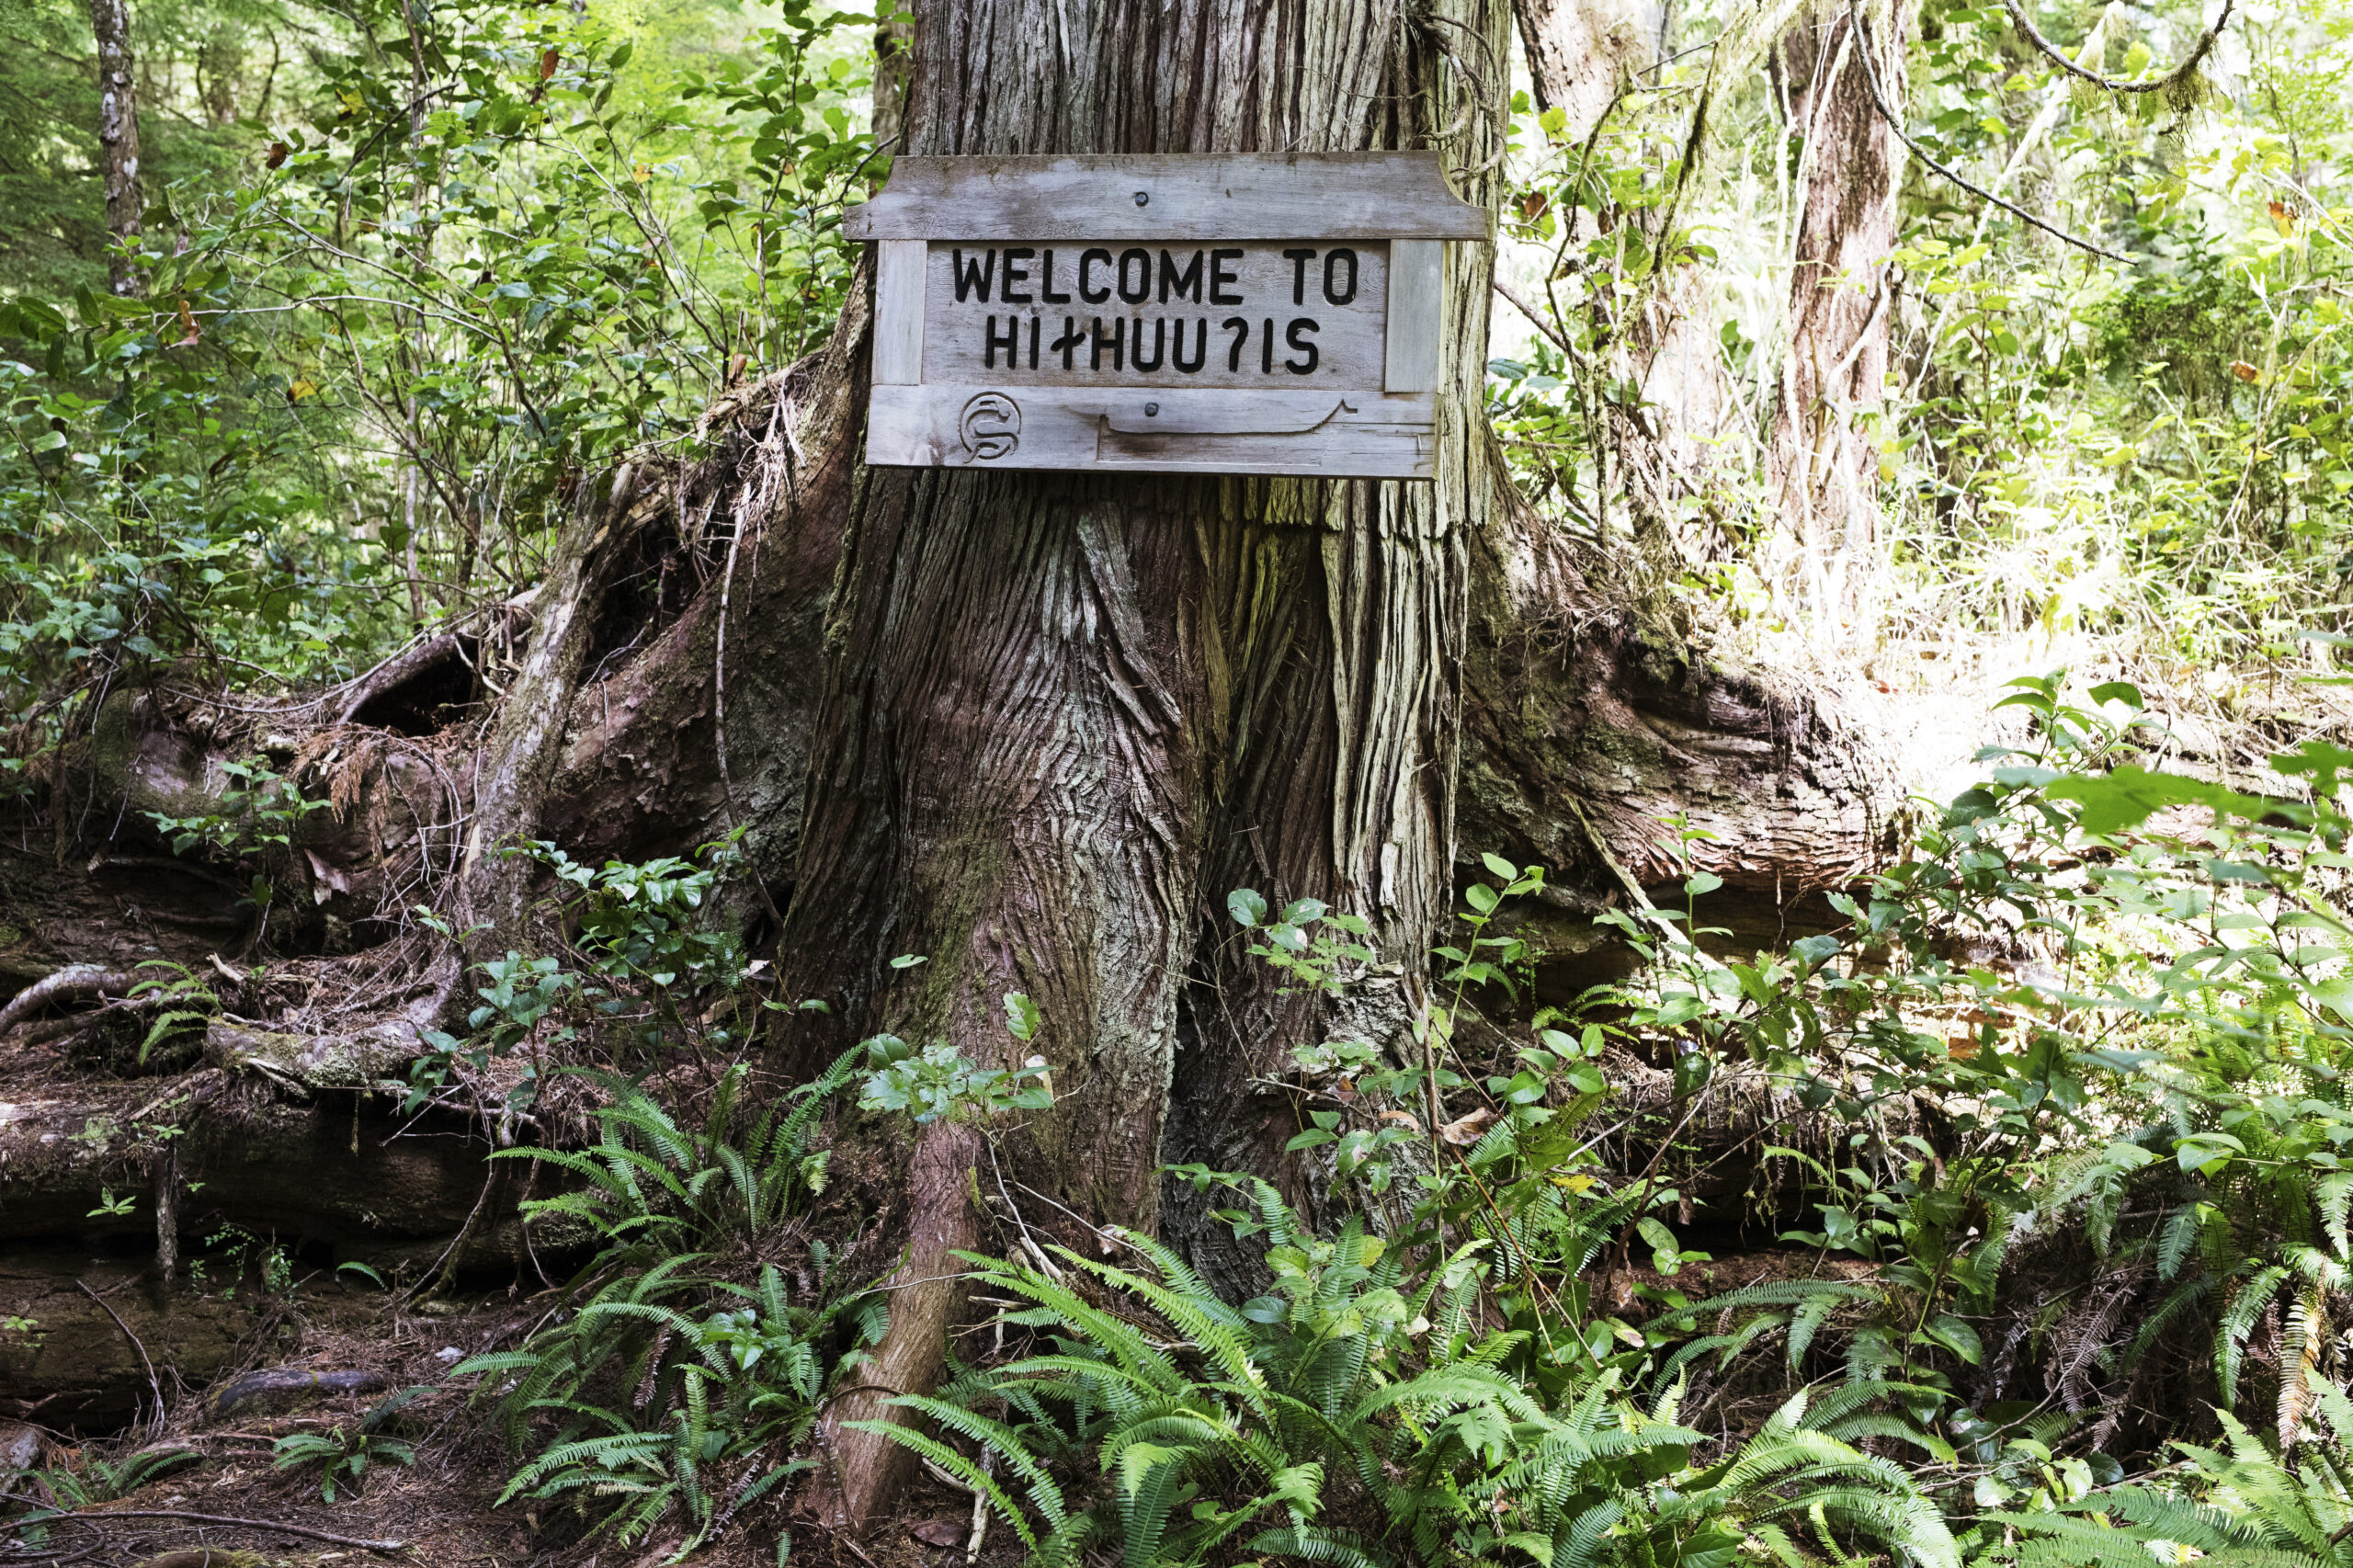 A welcome sign greets visitors as they enter the Big Tree Trail